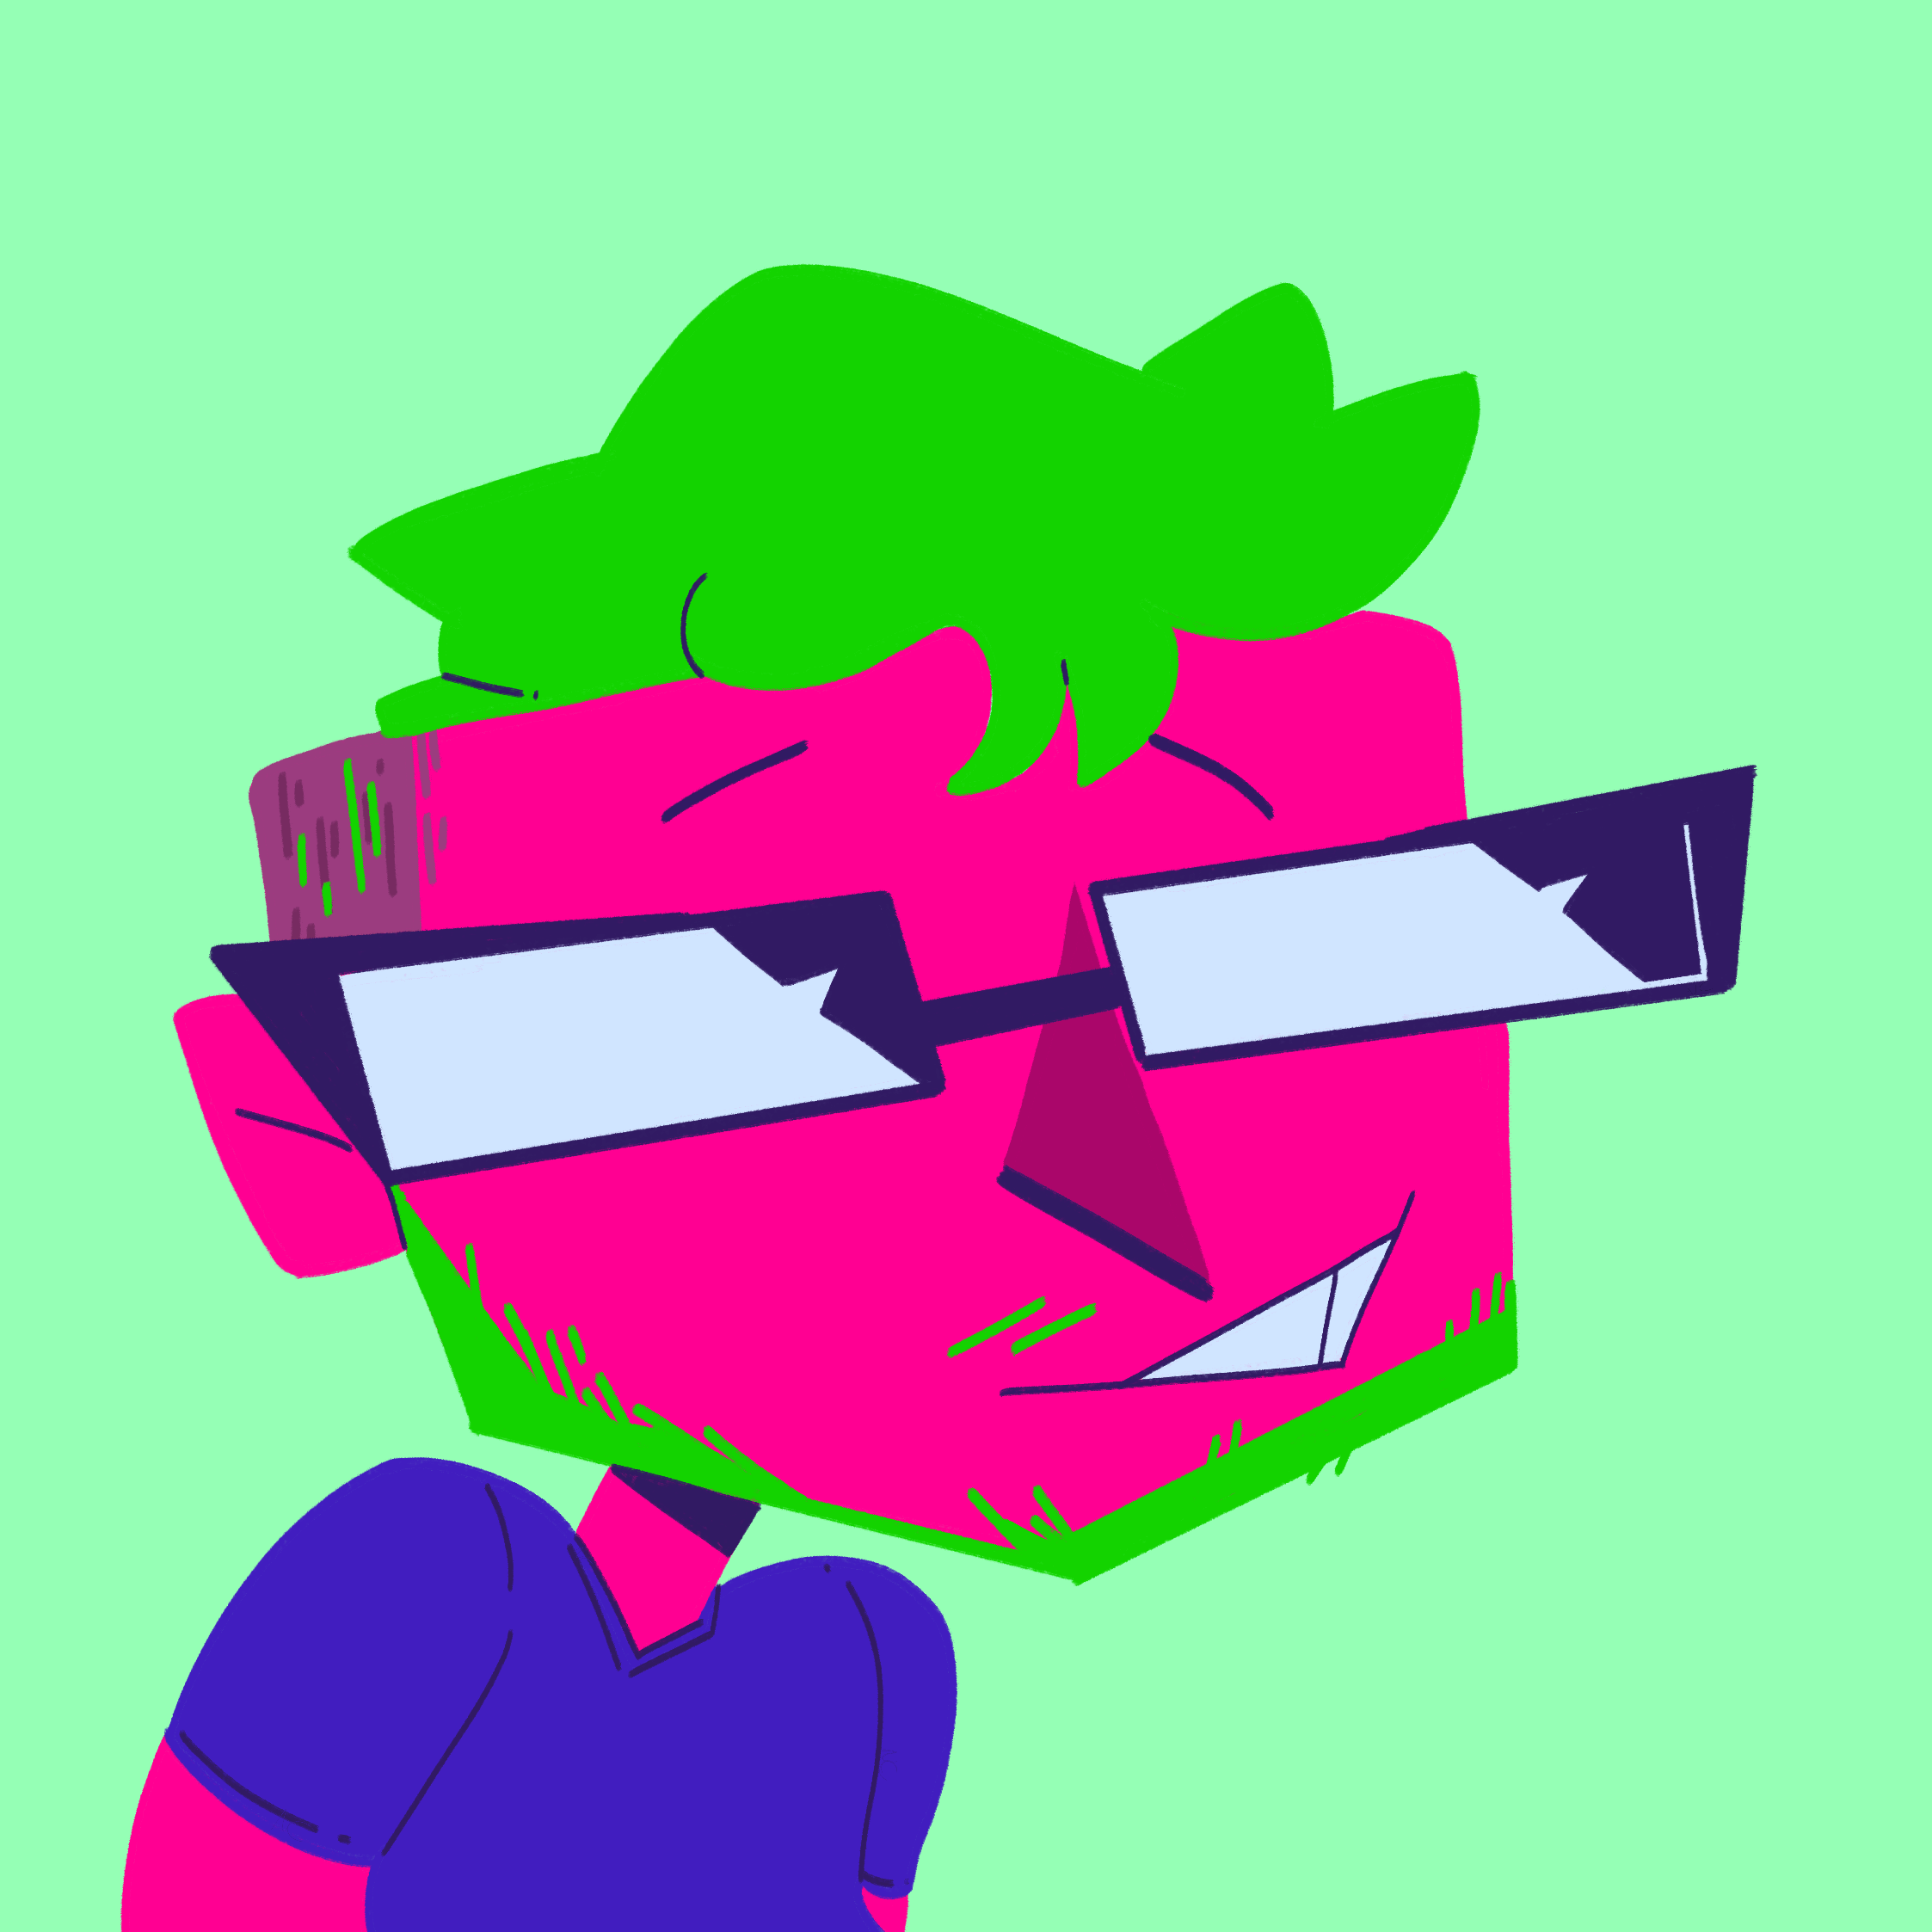 Illustrated avatar showing Devon with pink skin, green hair and green beard, and a blue t-shirt on a light green background